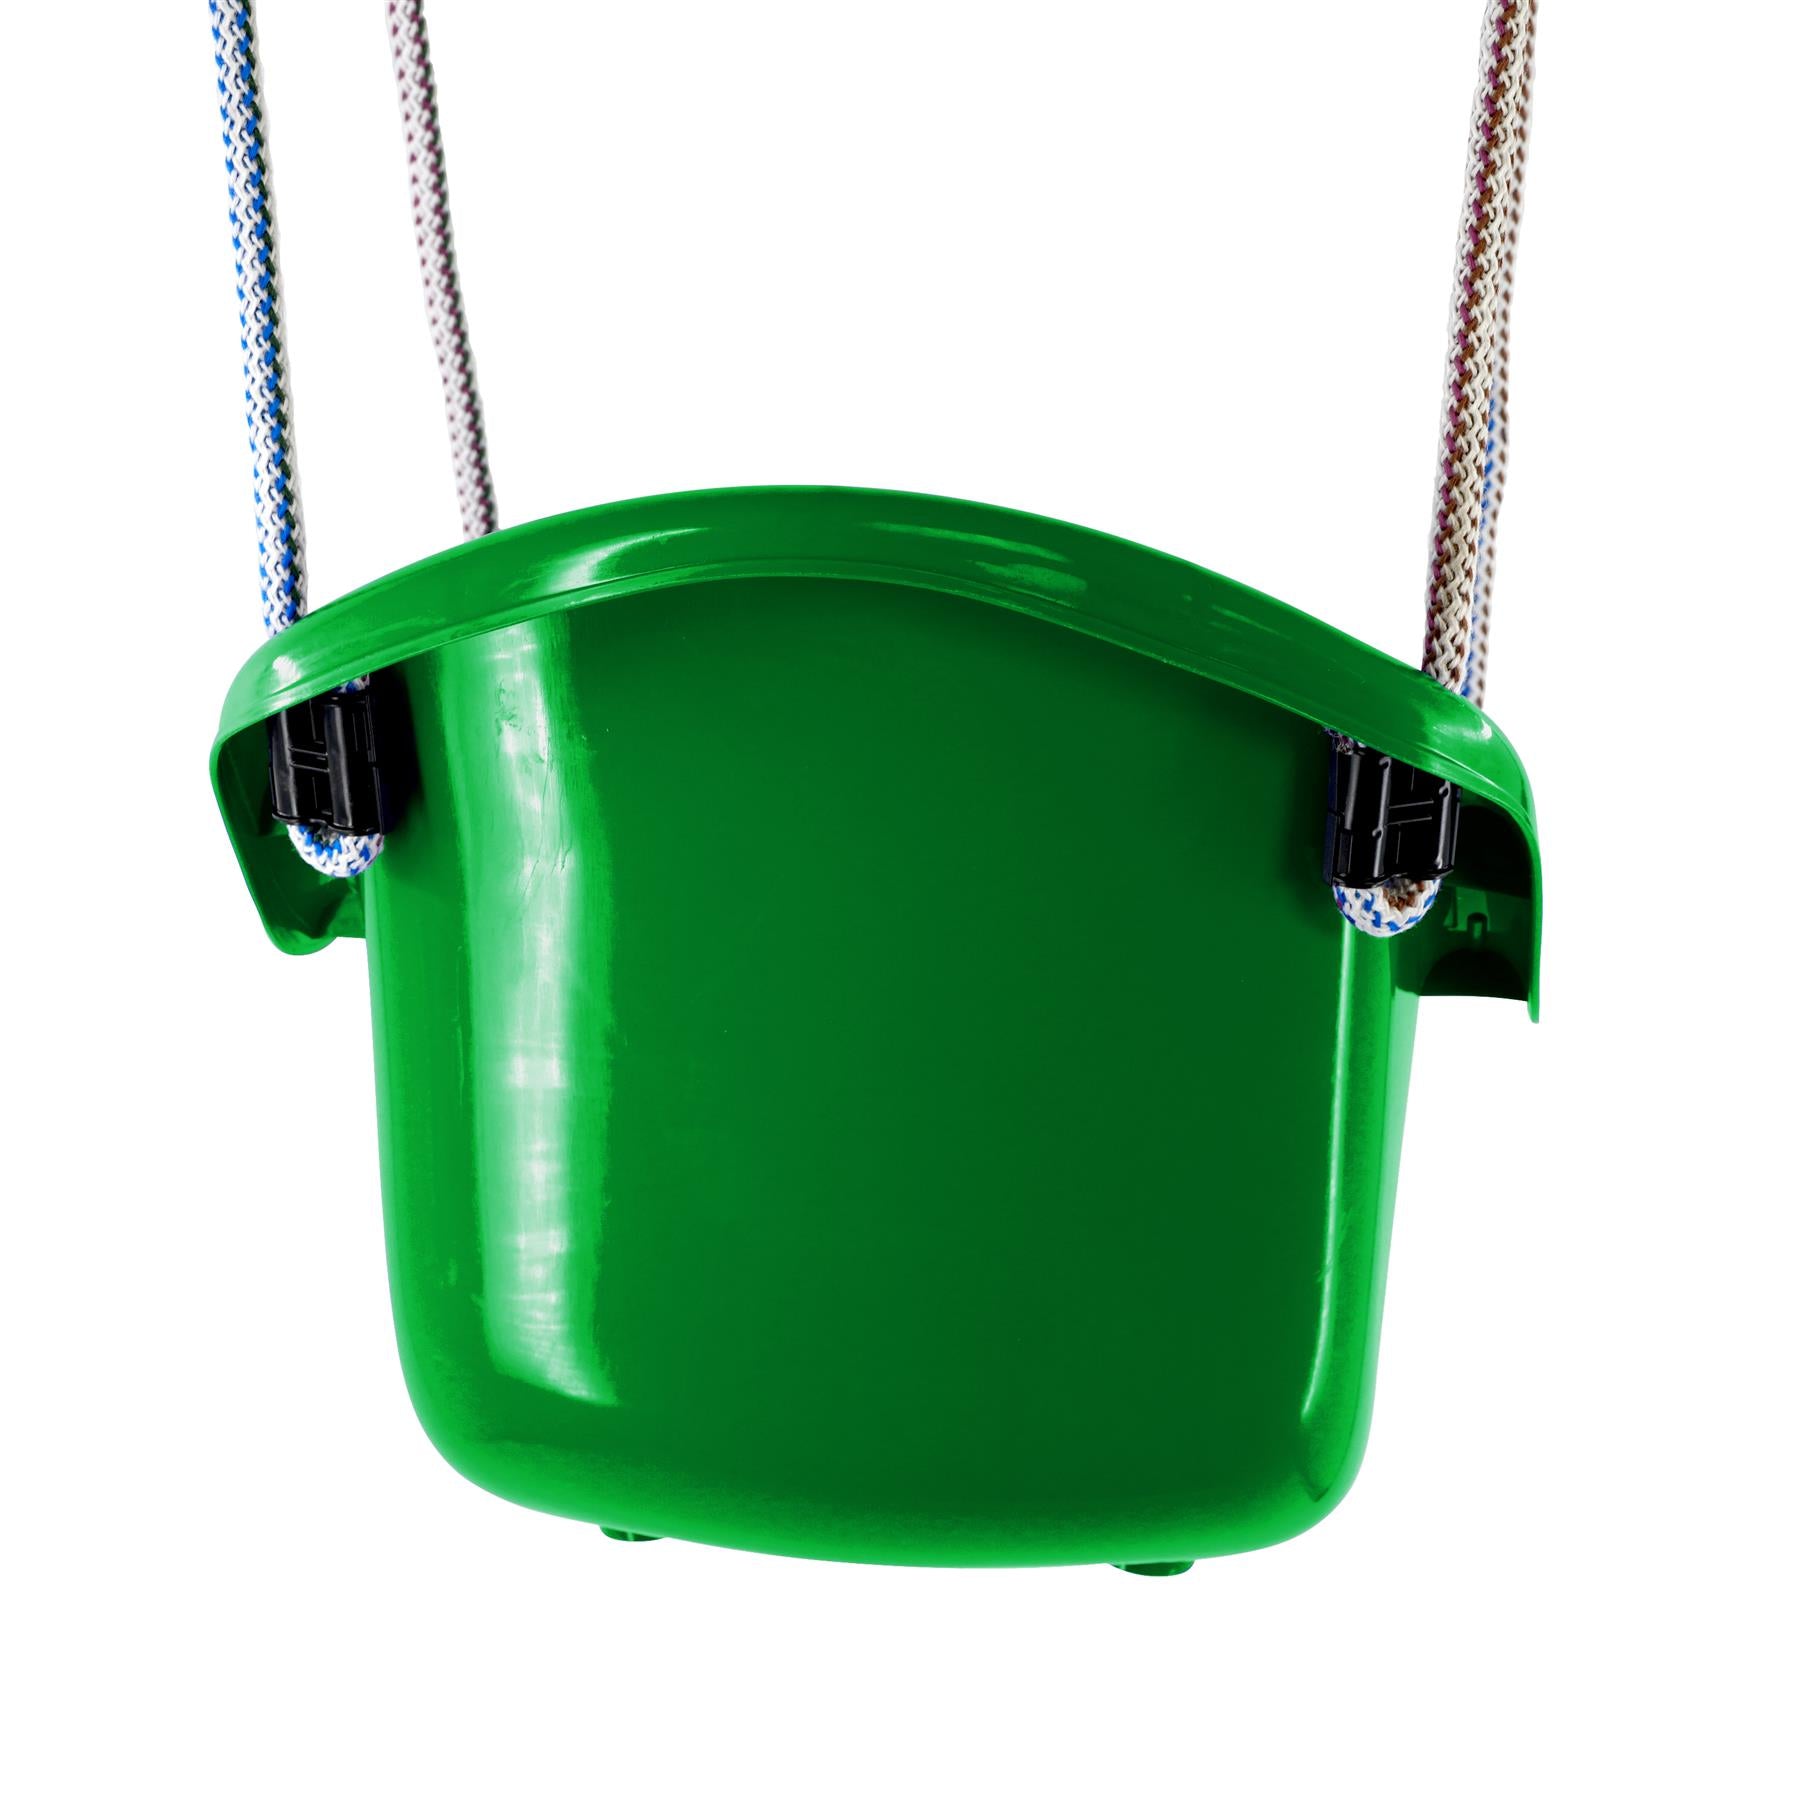 Green Children's Safety Swing Seat by MTS - UKBuyZone